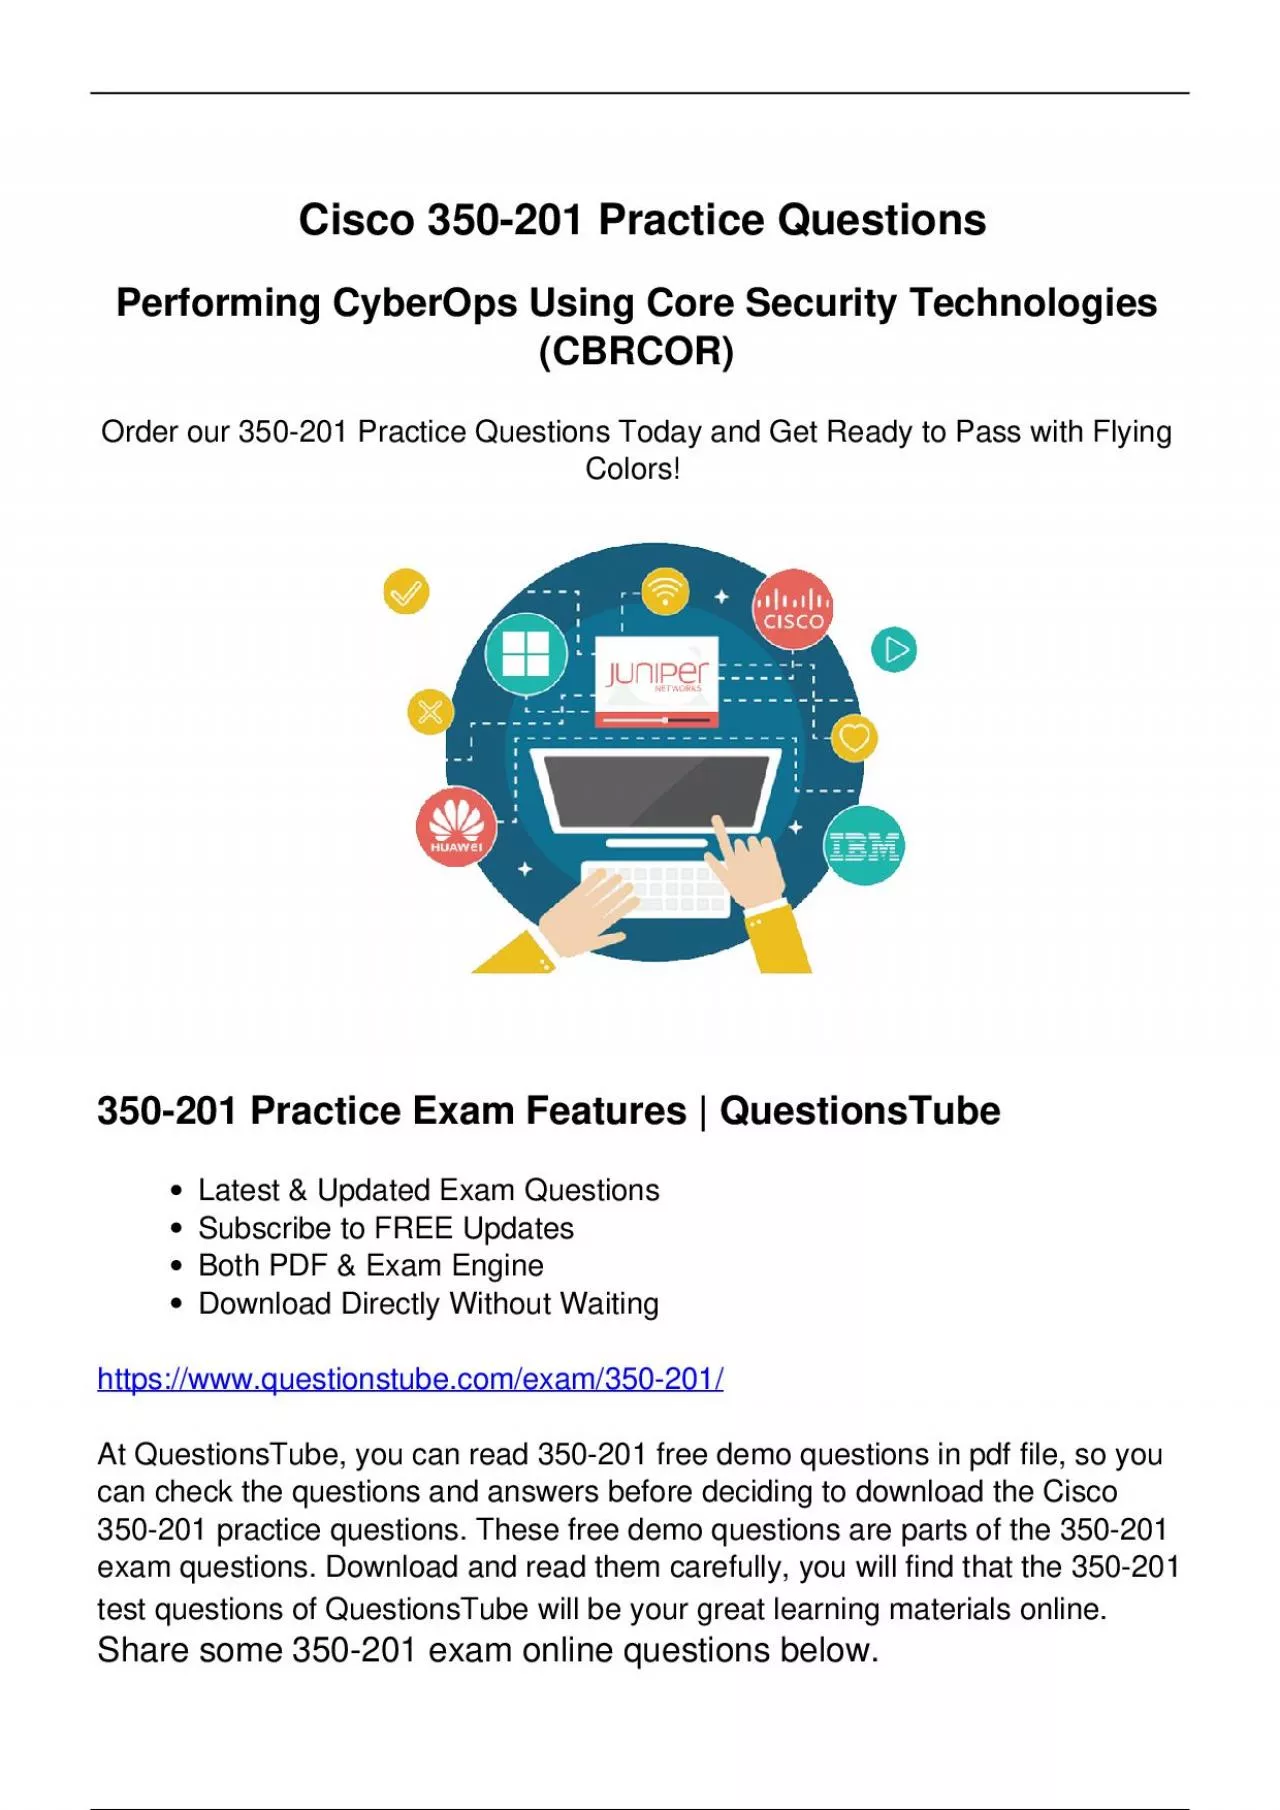 Actual Cisco 350-201 Exam Questions - Your Pathway to Quick Success